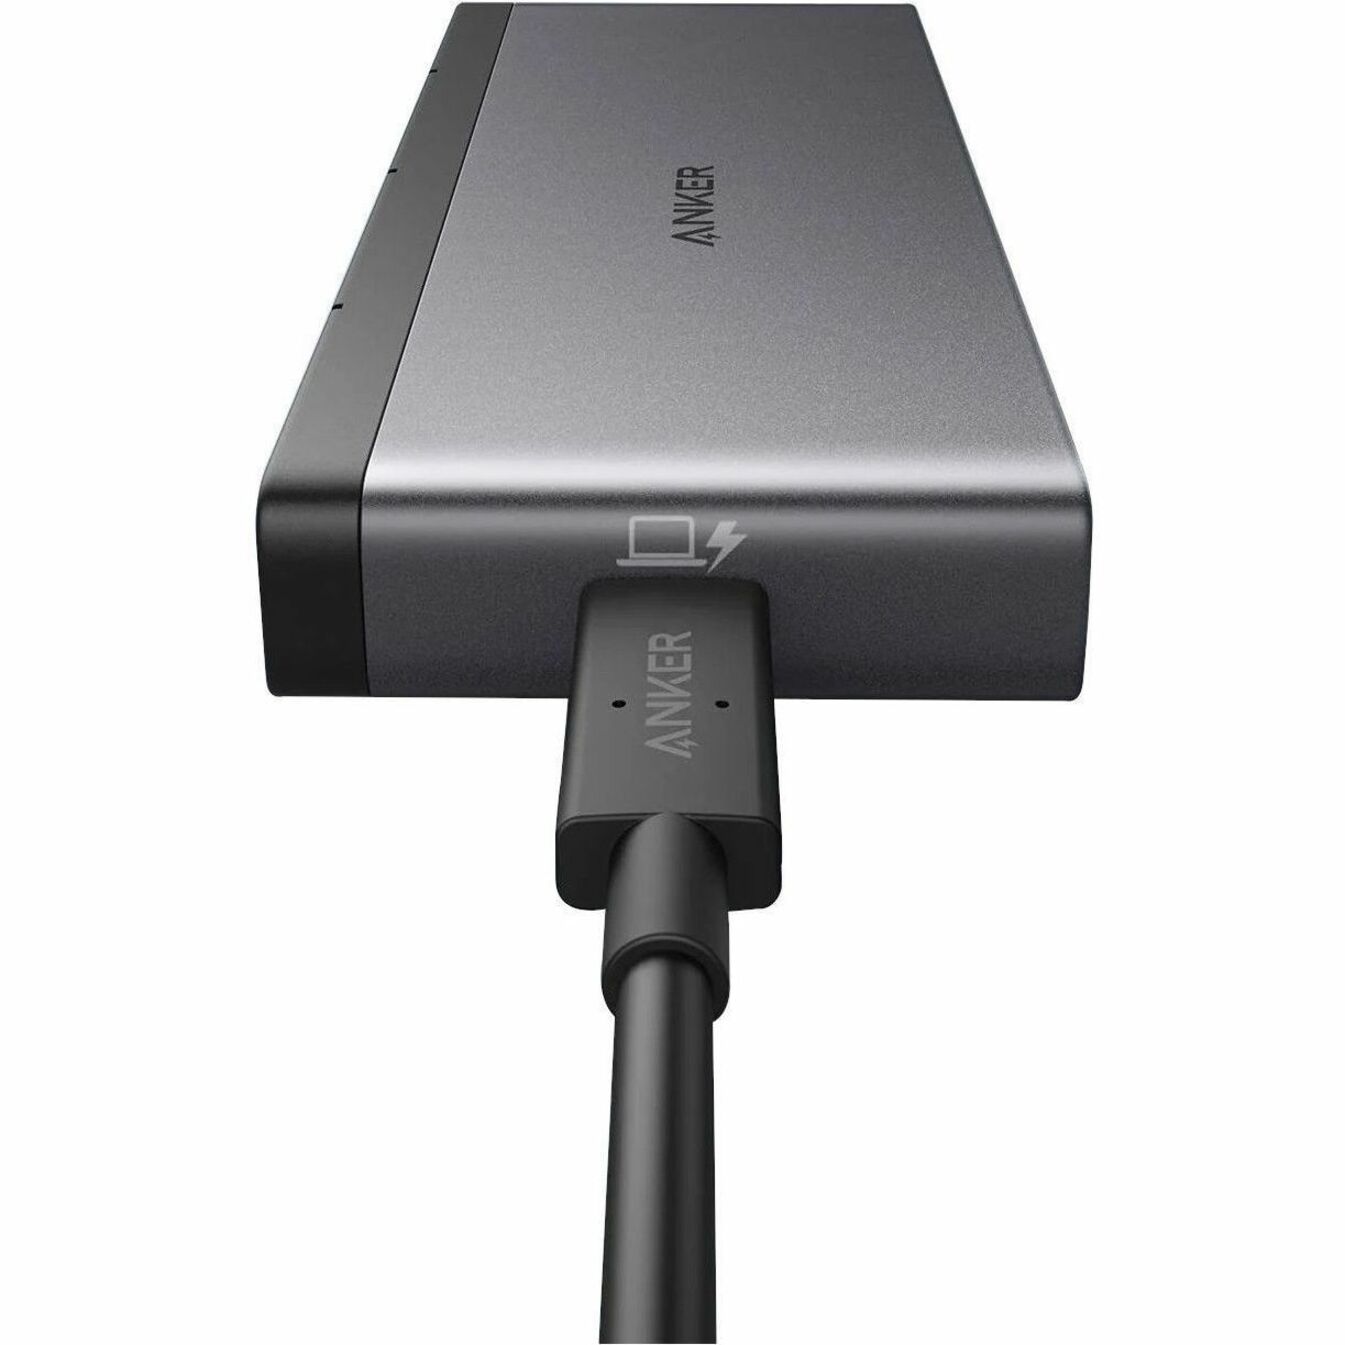 ANKER A83A8H11 556 USB-C Hub (8-in-1, USB4), 85W Power Delivery Pass-through, 8K @ 30Hz, Ethernet